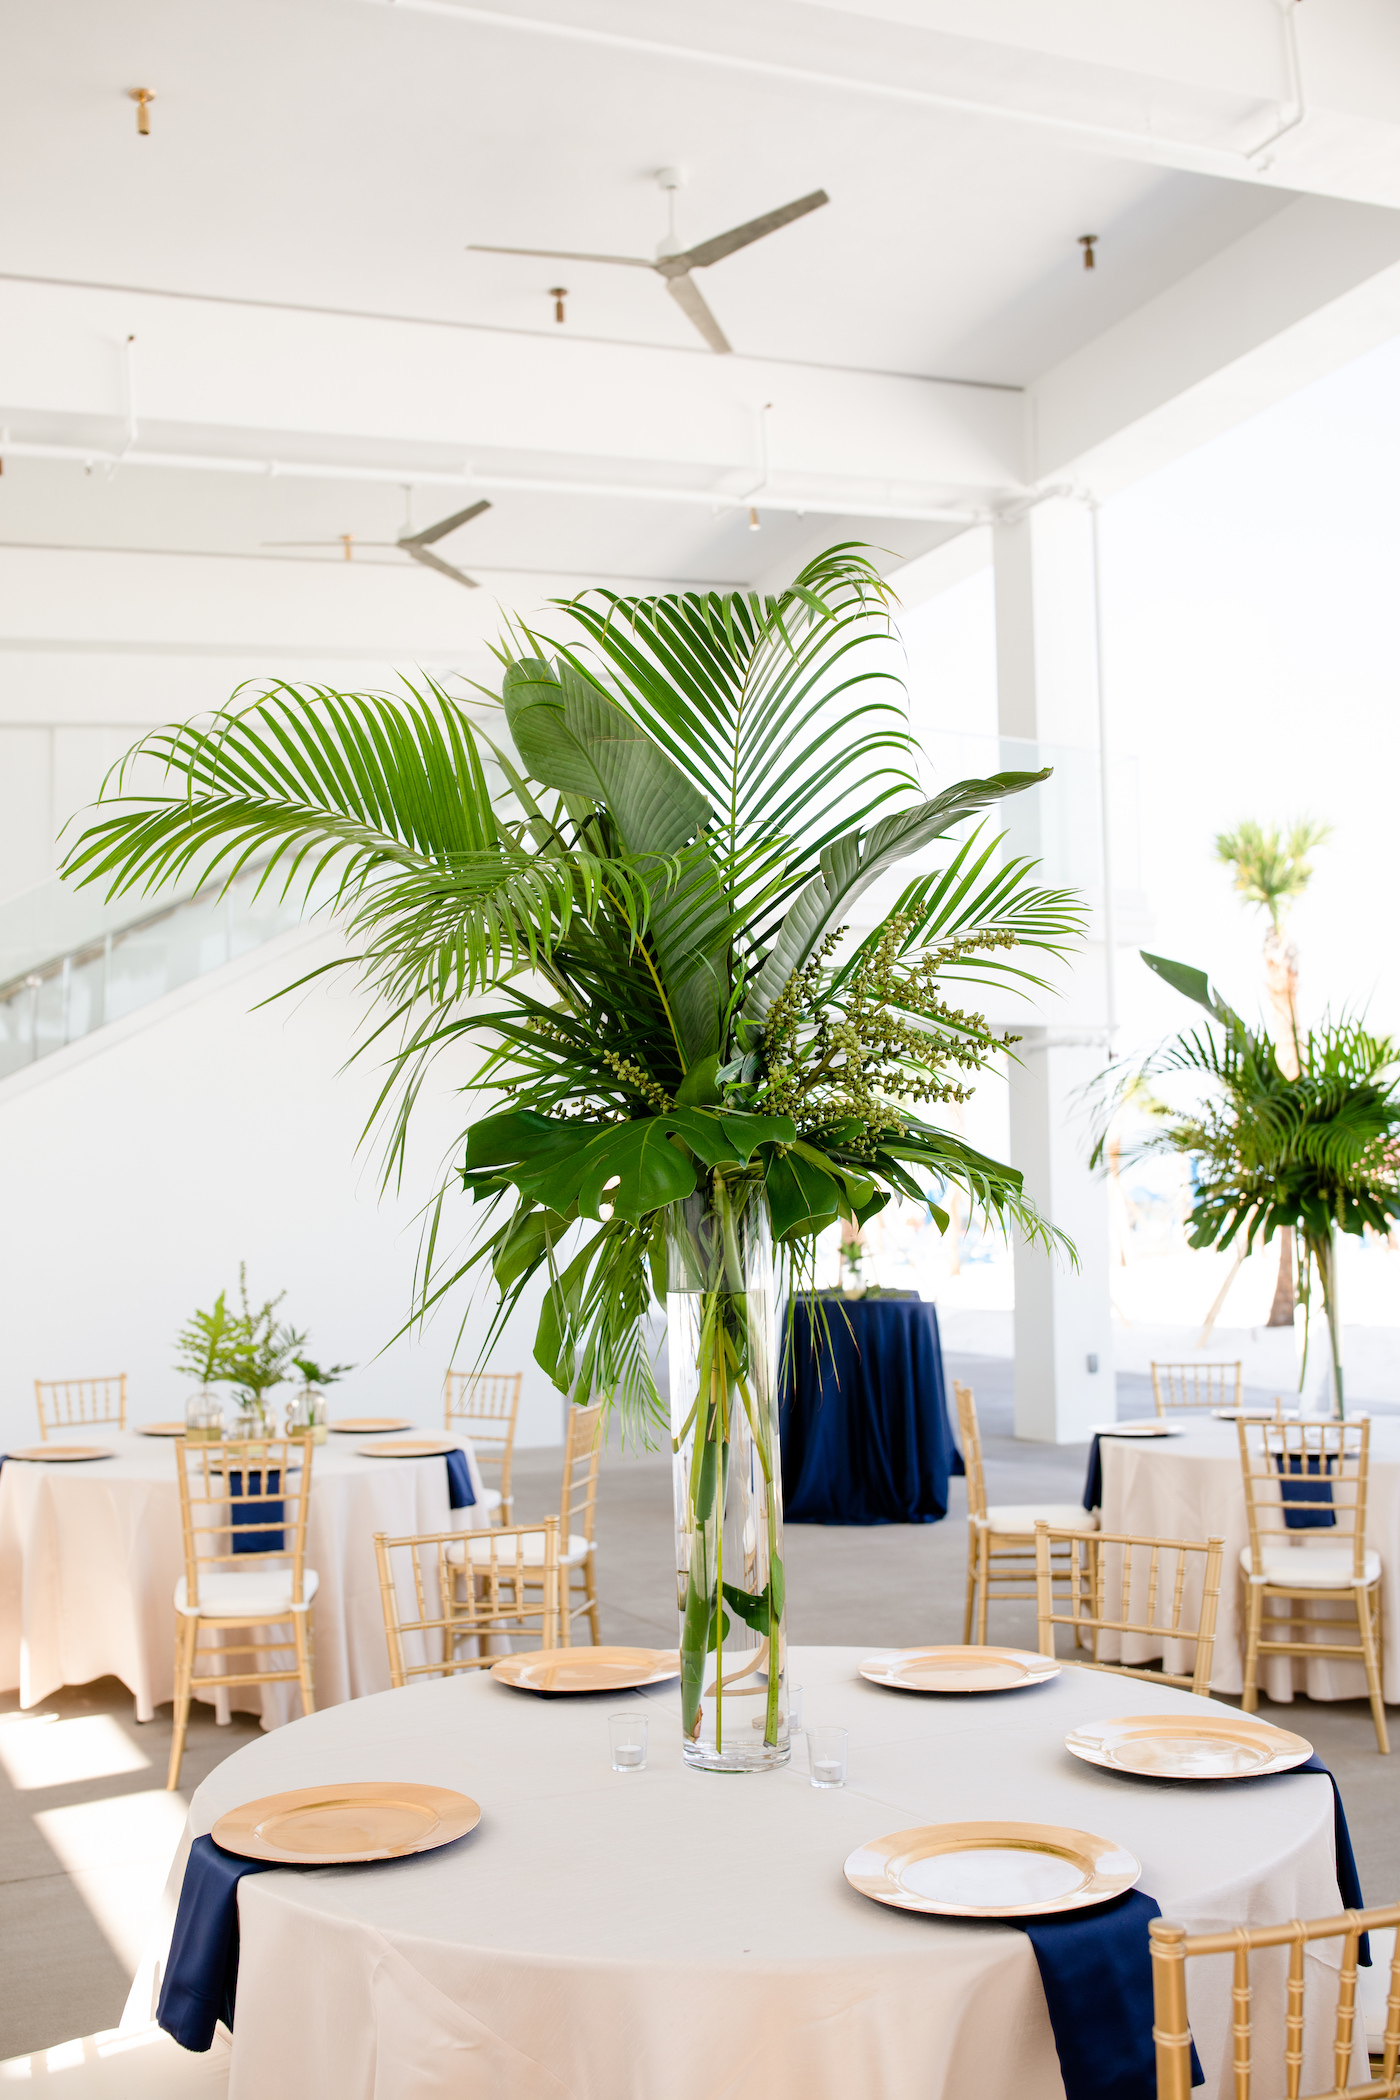 Clearwater Beach Wedding Venue Hilton Clearwater Beach | Modern Tropical Beach Outdoor Wedding Reception Terrace with White Table Linens and Navy Napkins under Gold Charger Plates | Gold Chiavari Chairs and Champagne Sash Bows and Tropical Palm Frond Leaf Floral Arrangement Centerpieces